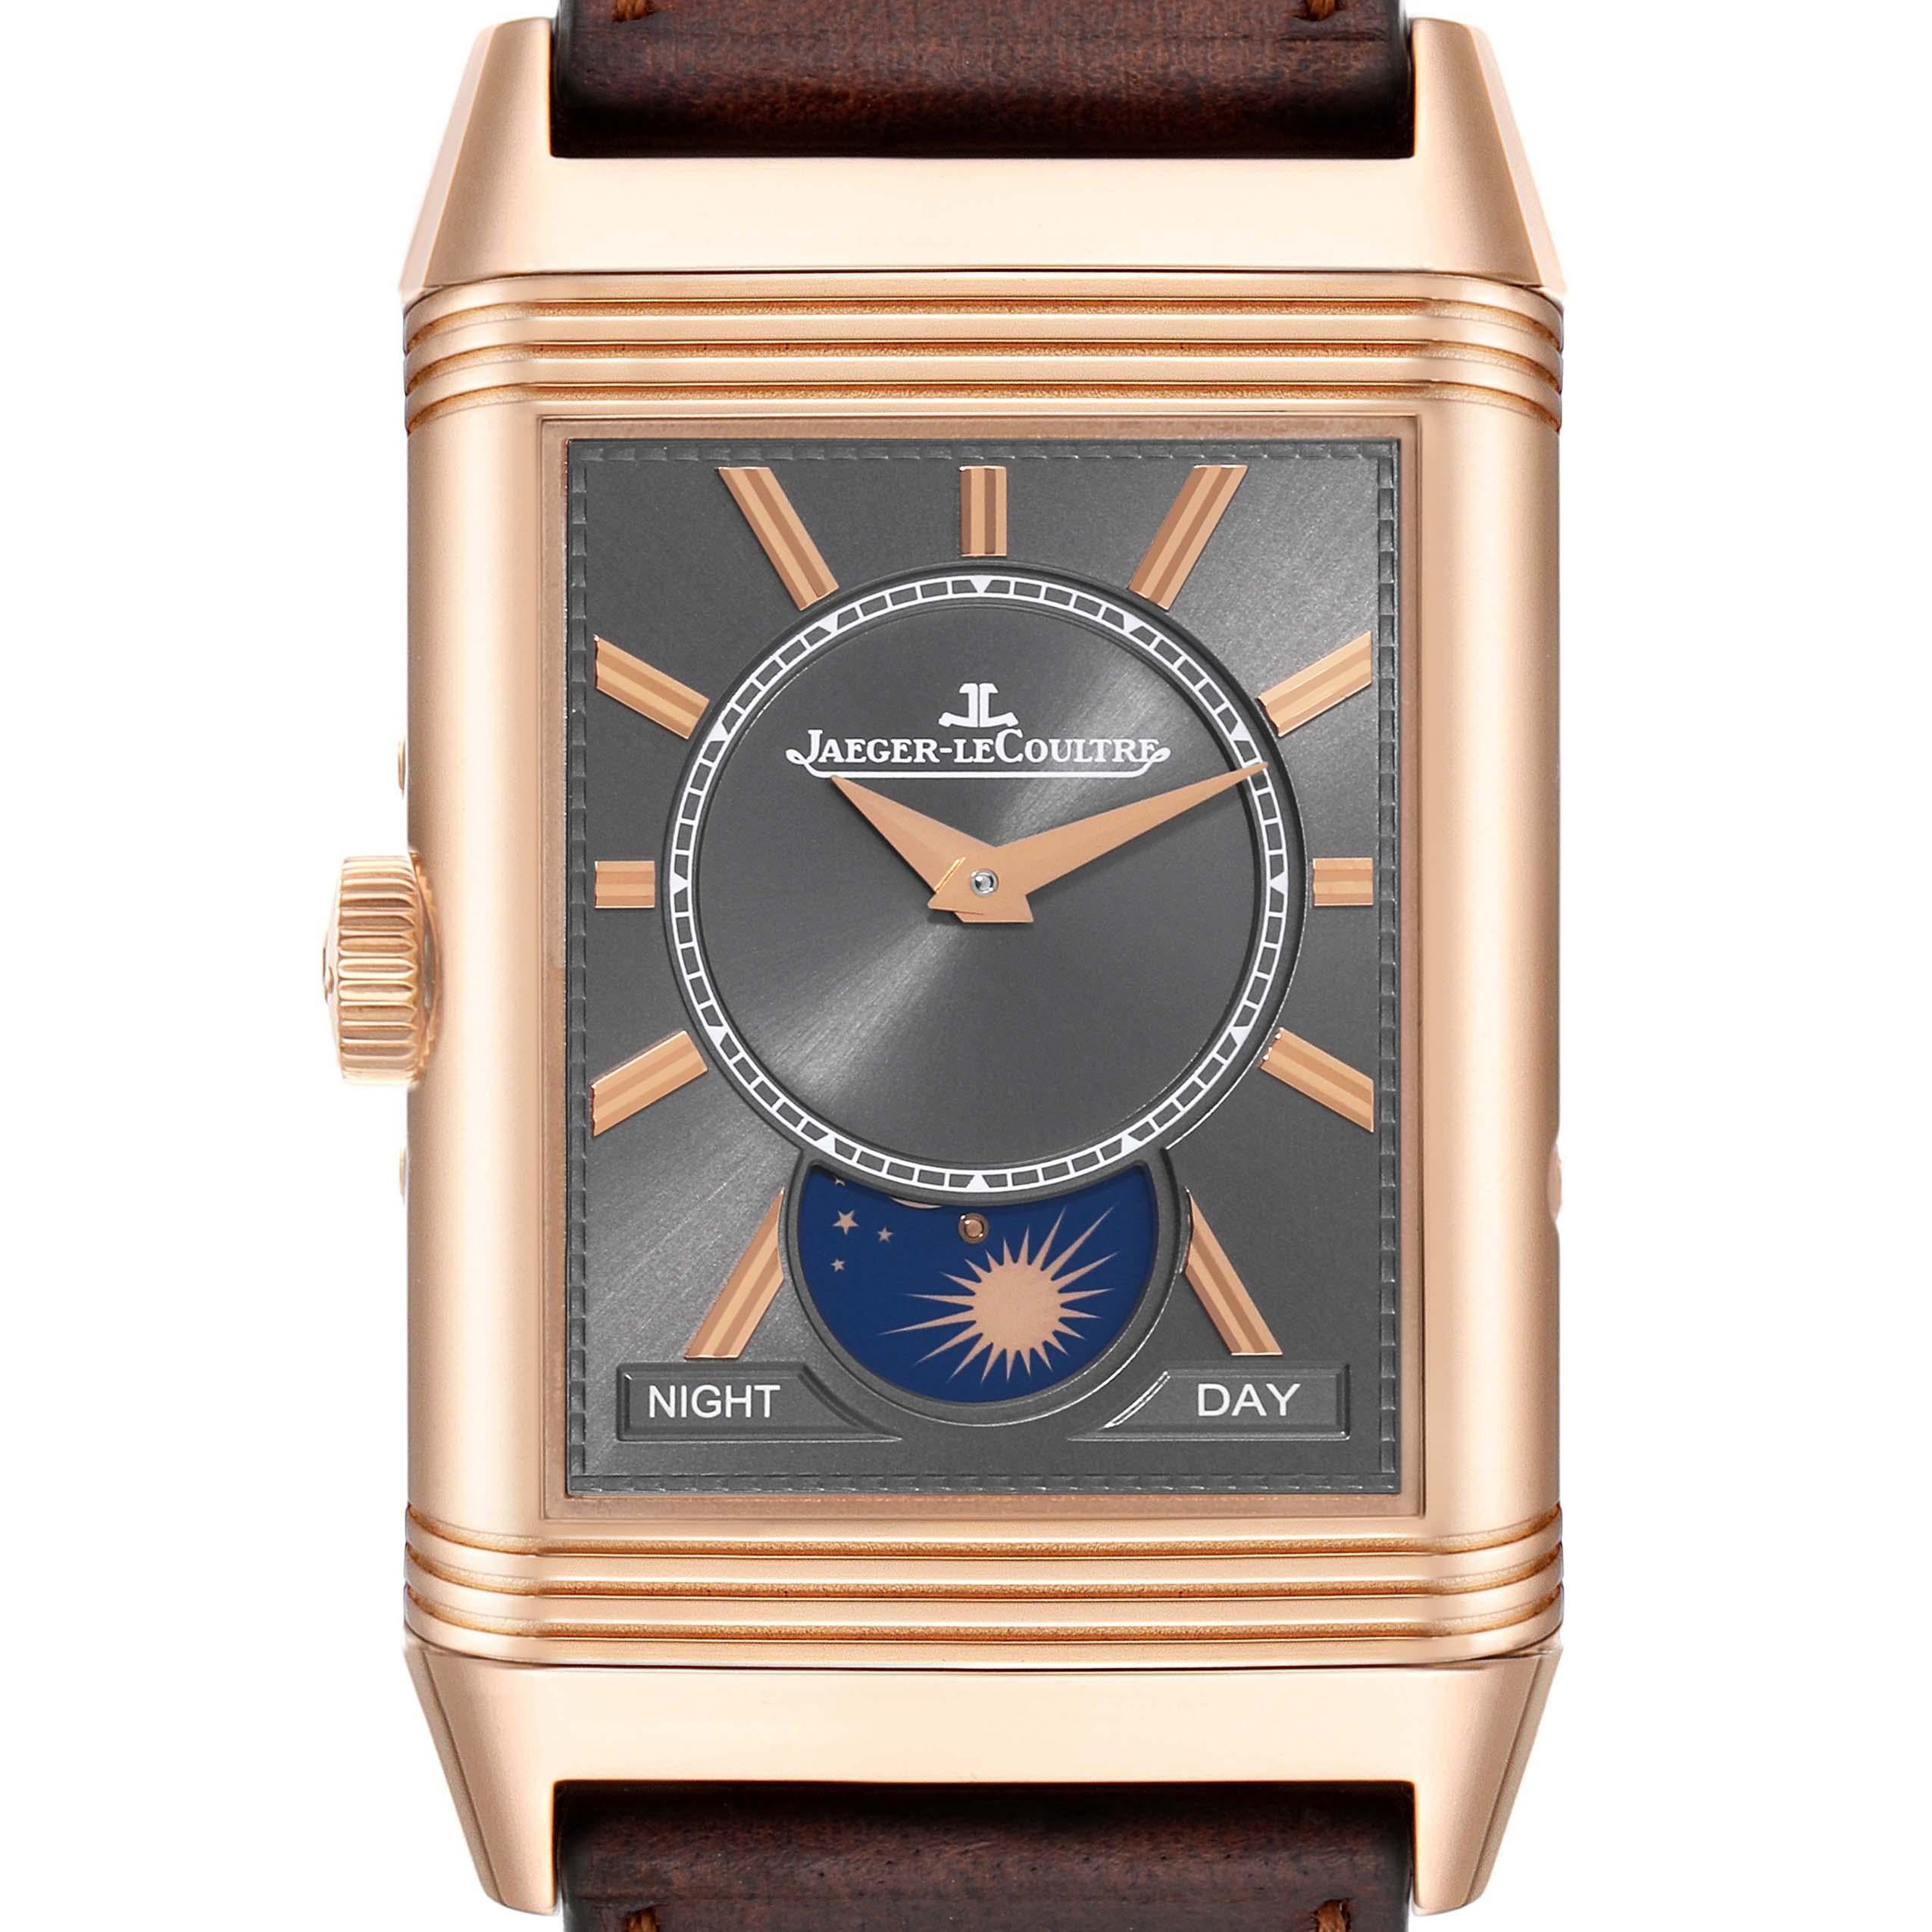 Jaeger LeCoultre Reverso Tribute Duoface Rose Gold Mens Watch 216.2.D3 Q3912530. Manual-winding movement. Rhodium plated with engine turned embellishment, 19 jewels, 223 components, a single barrel, mechanism oscillates at a frequency of 21,600 vph.